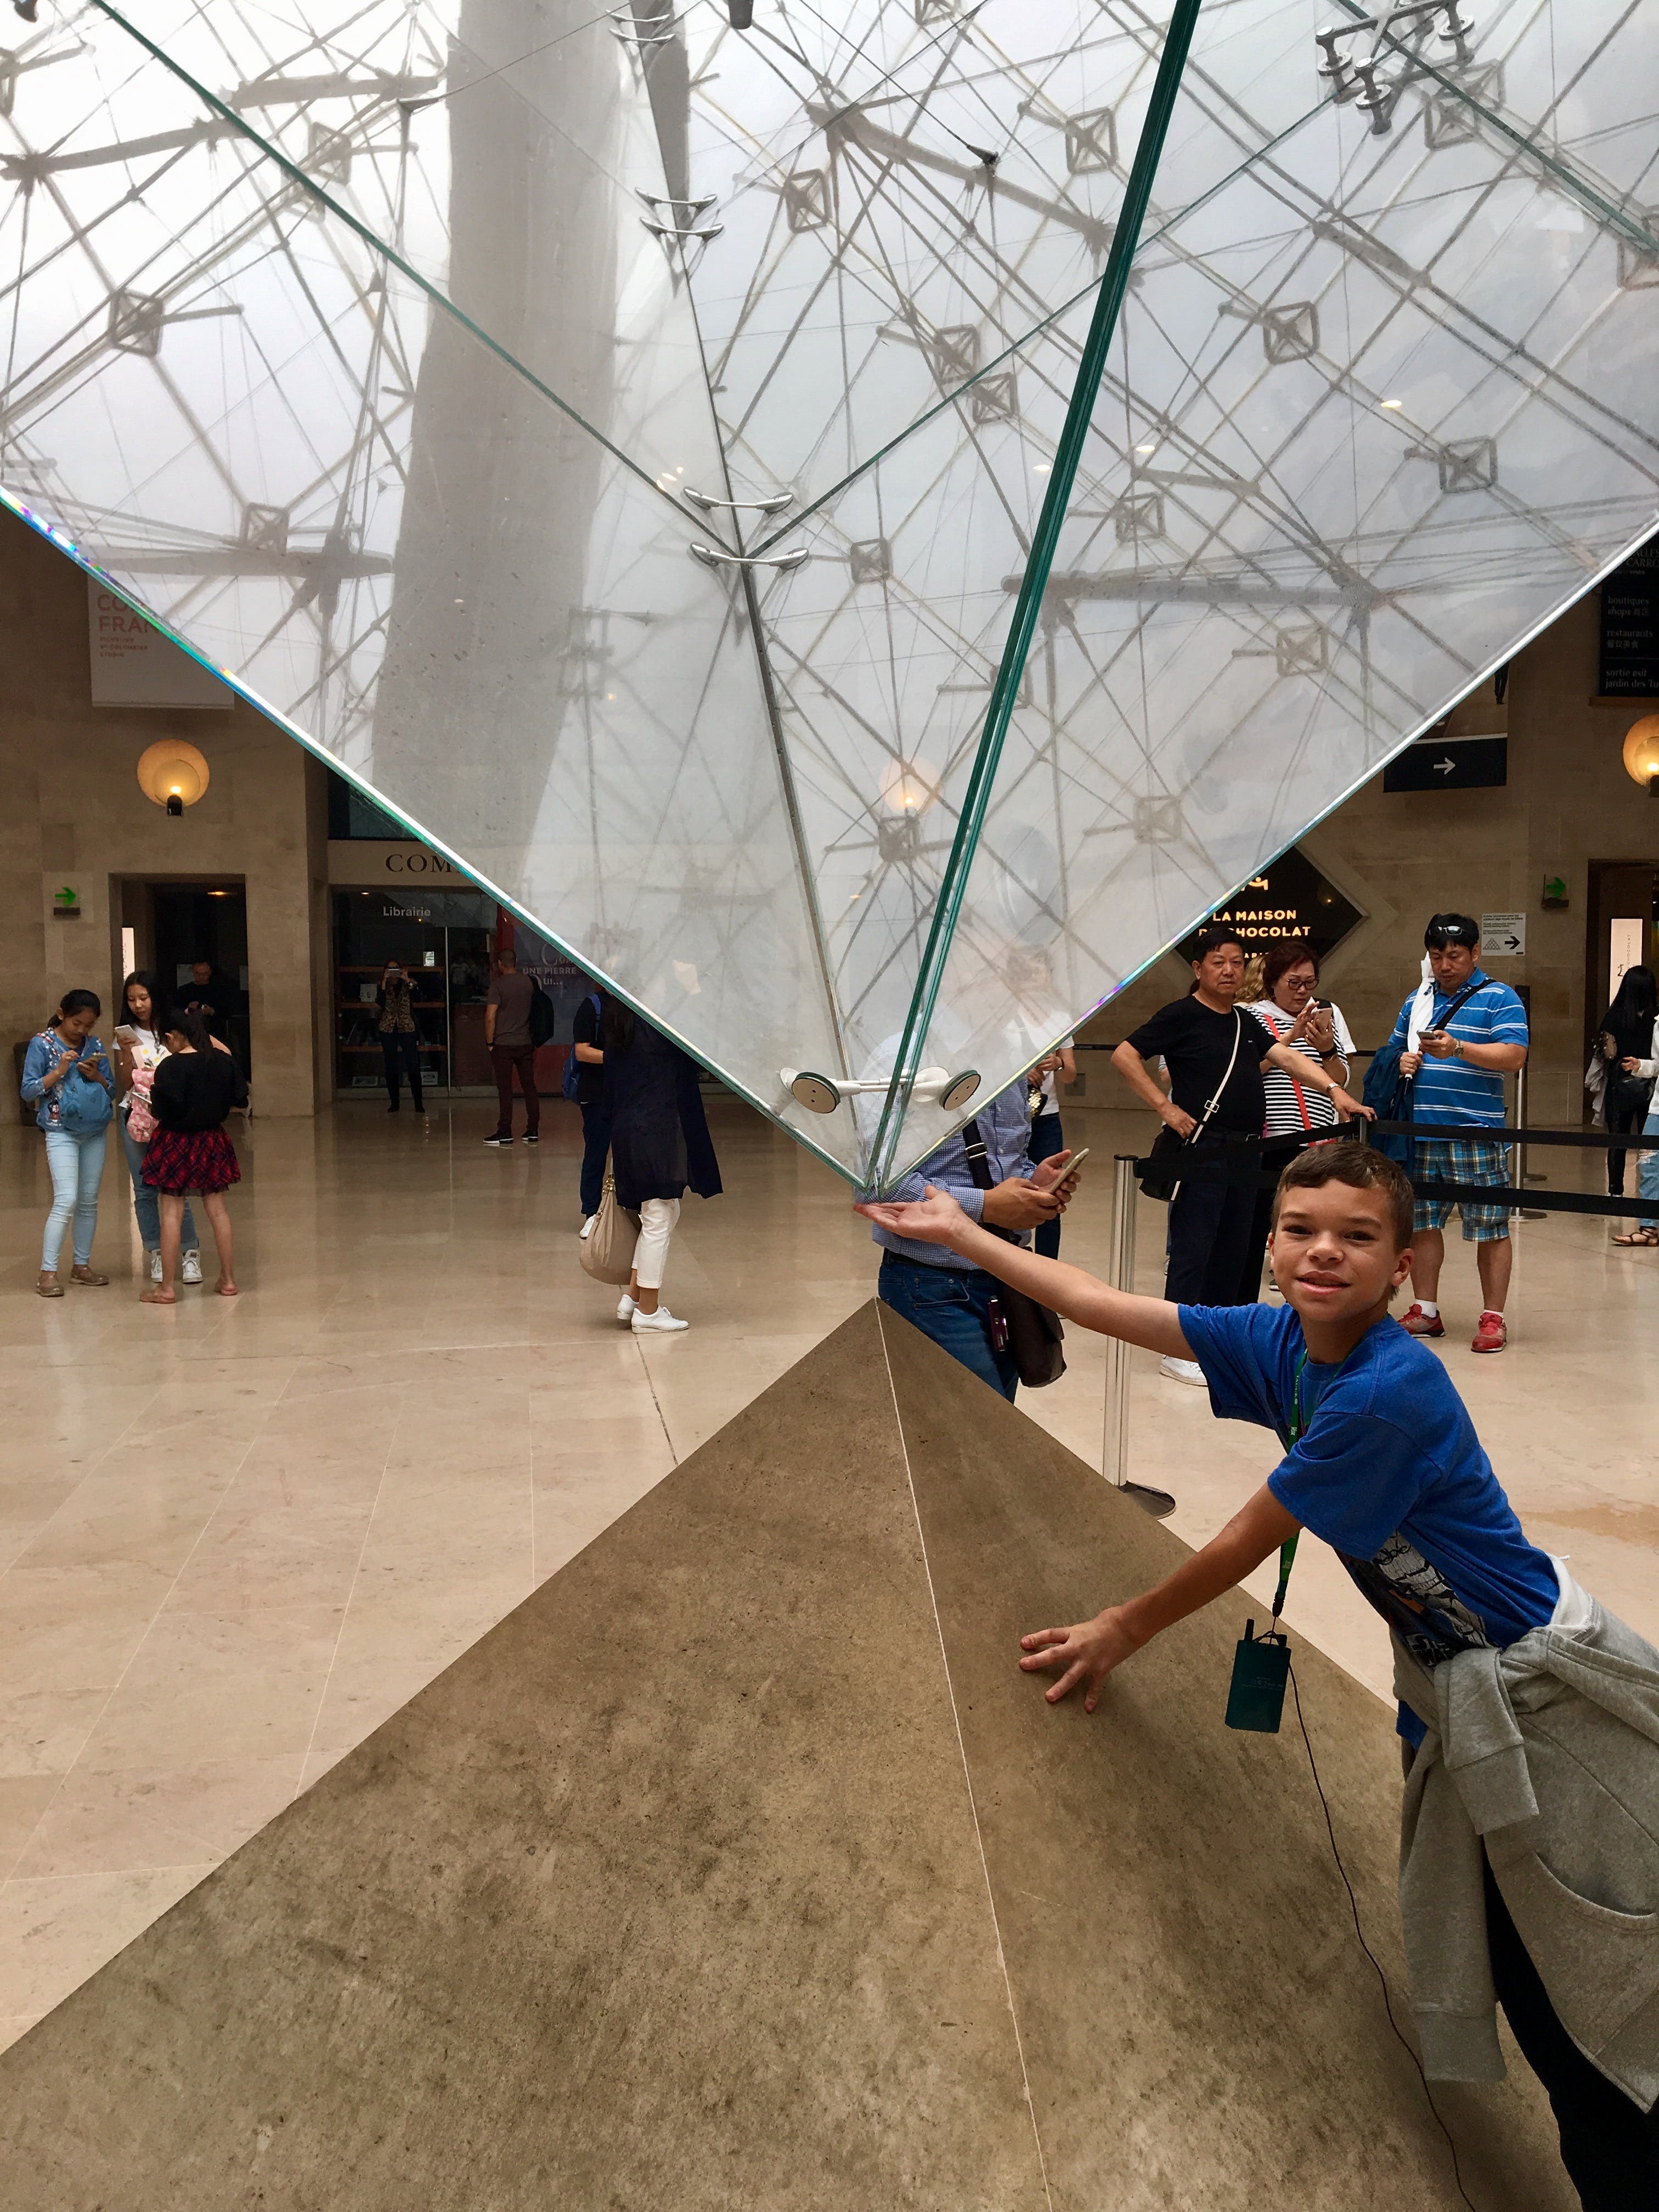 Kids playing at the Louvre in Paris